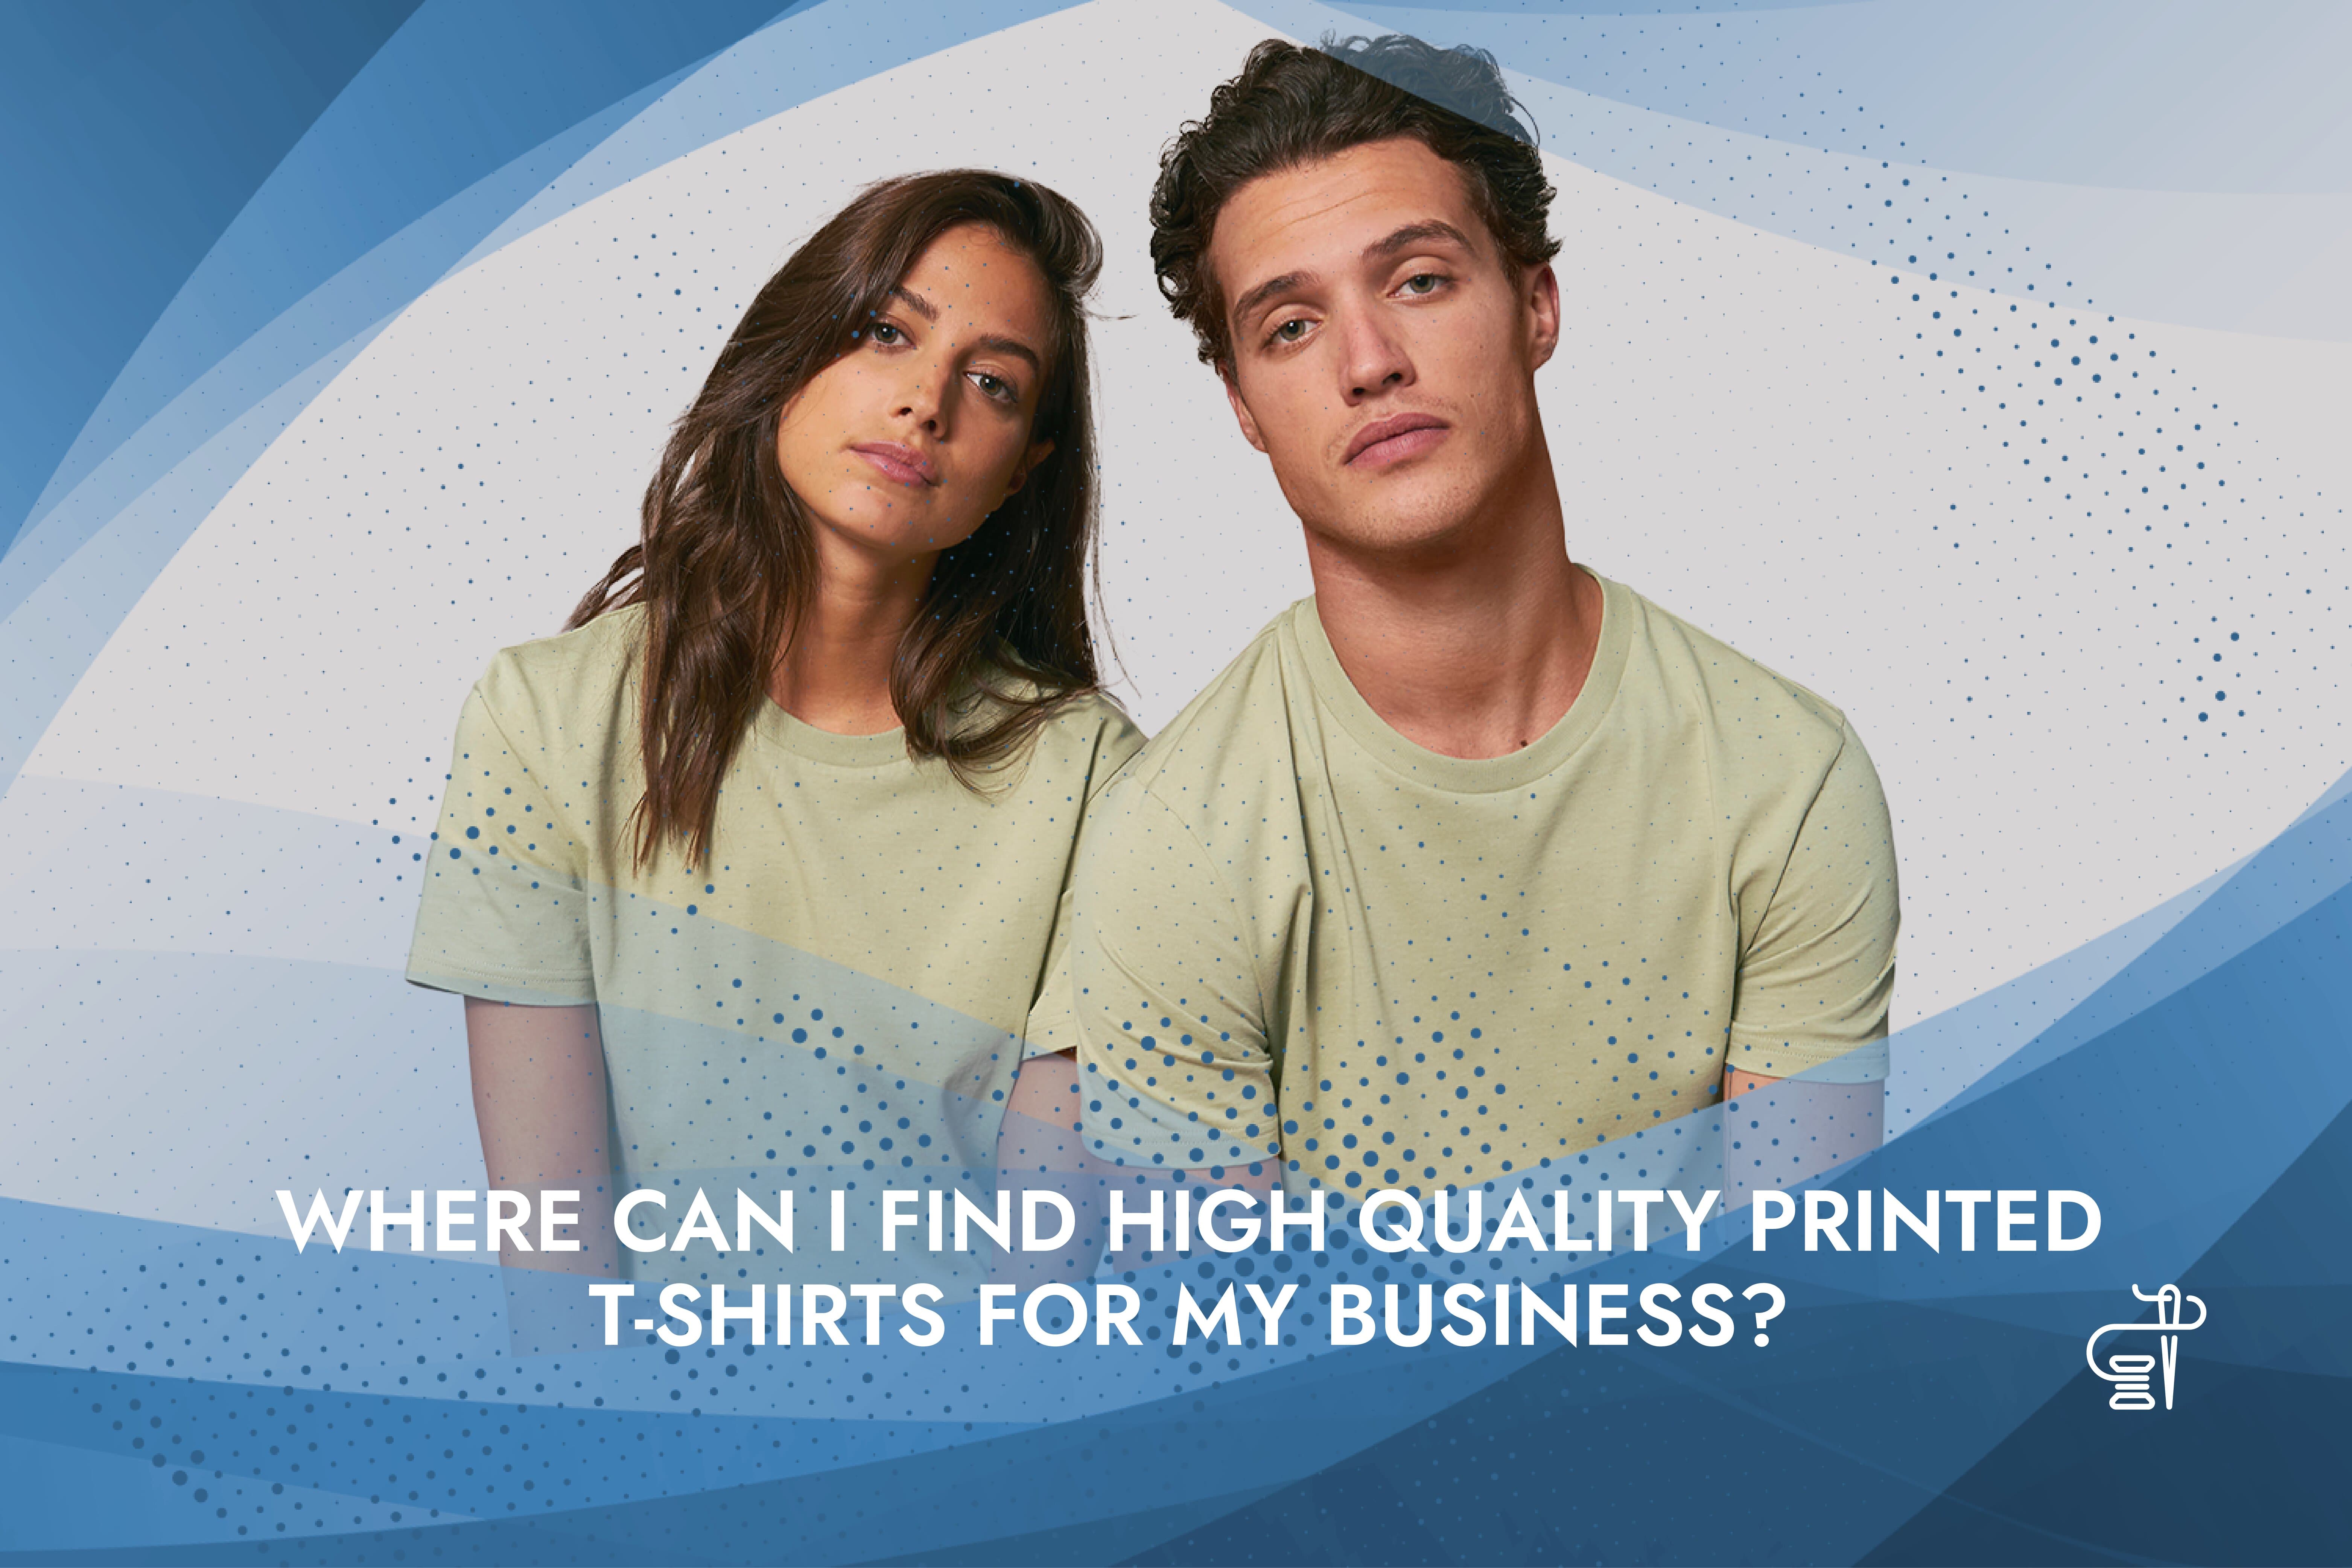 Where Can I Find High-Quality Printed T-Shirts For My Business?